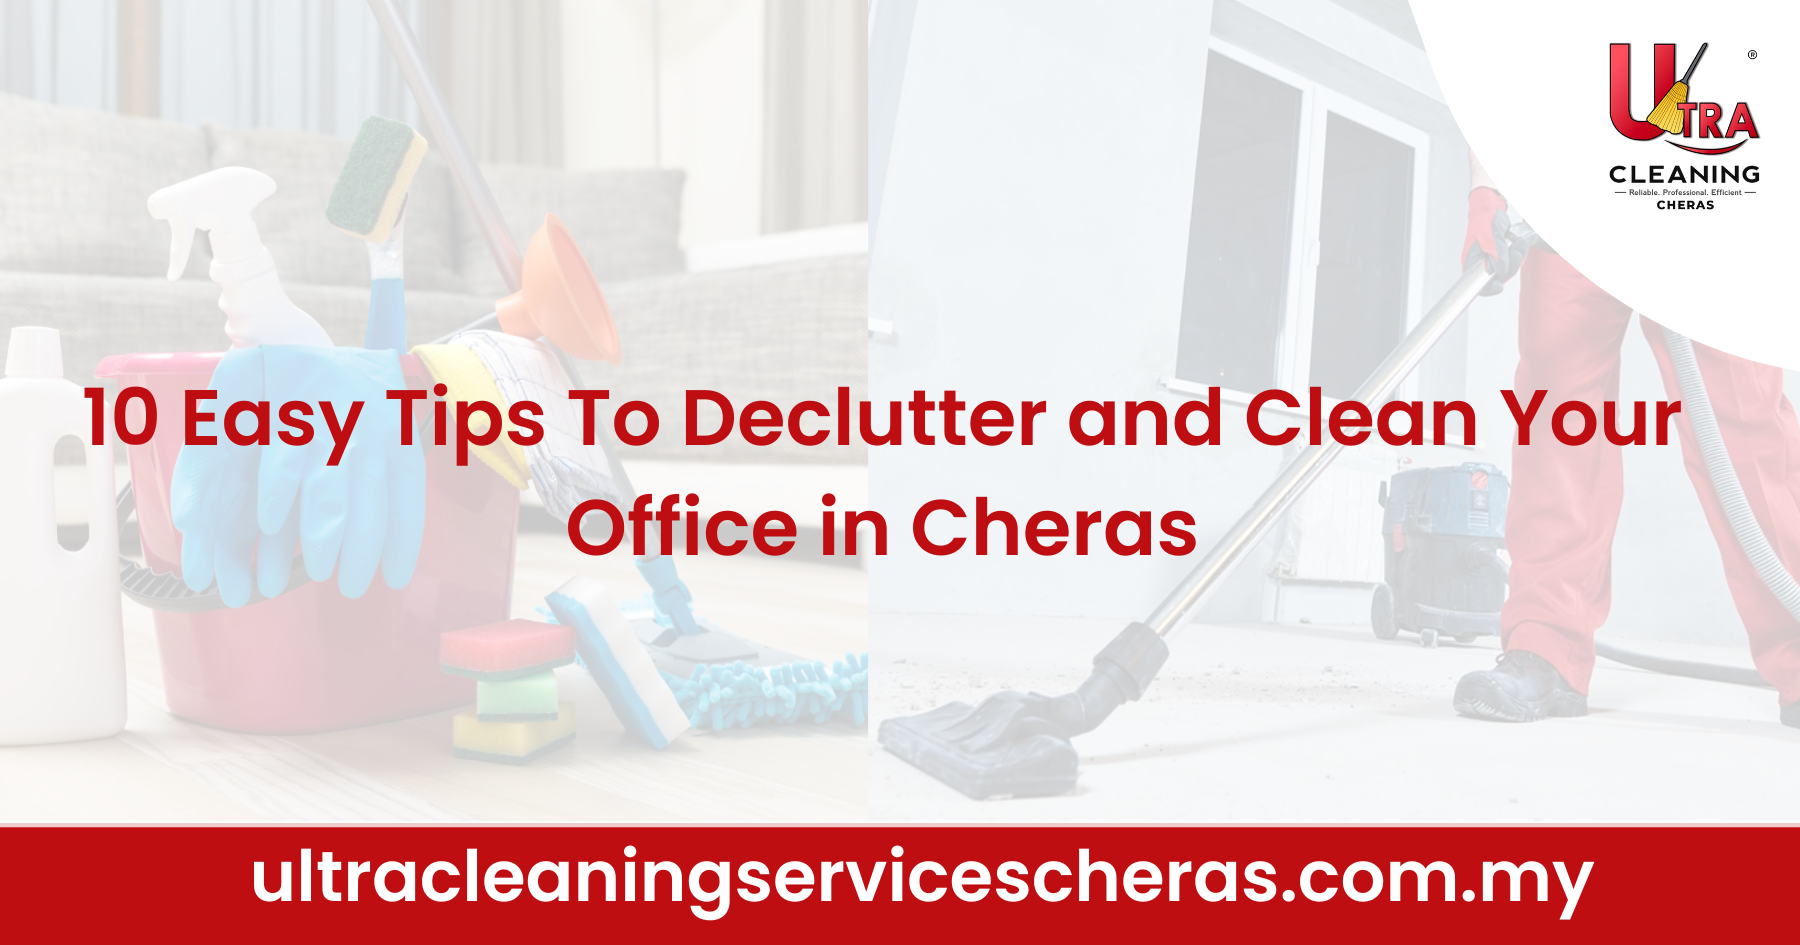 10 Easy Tips To Declutter and Clean Your Office in Cheras